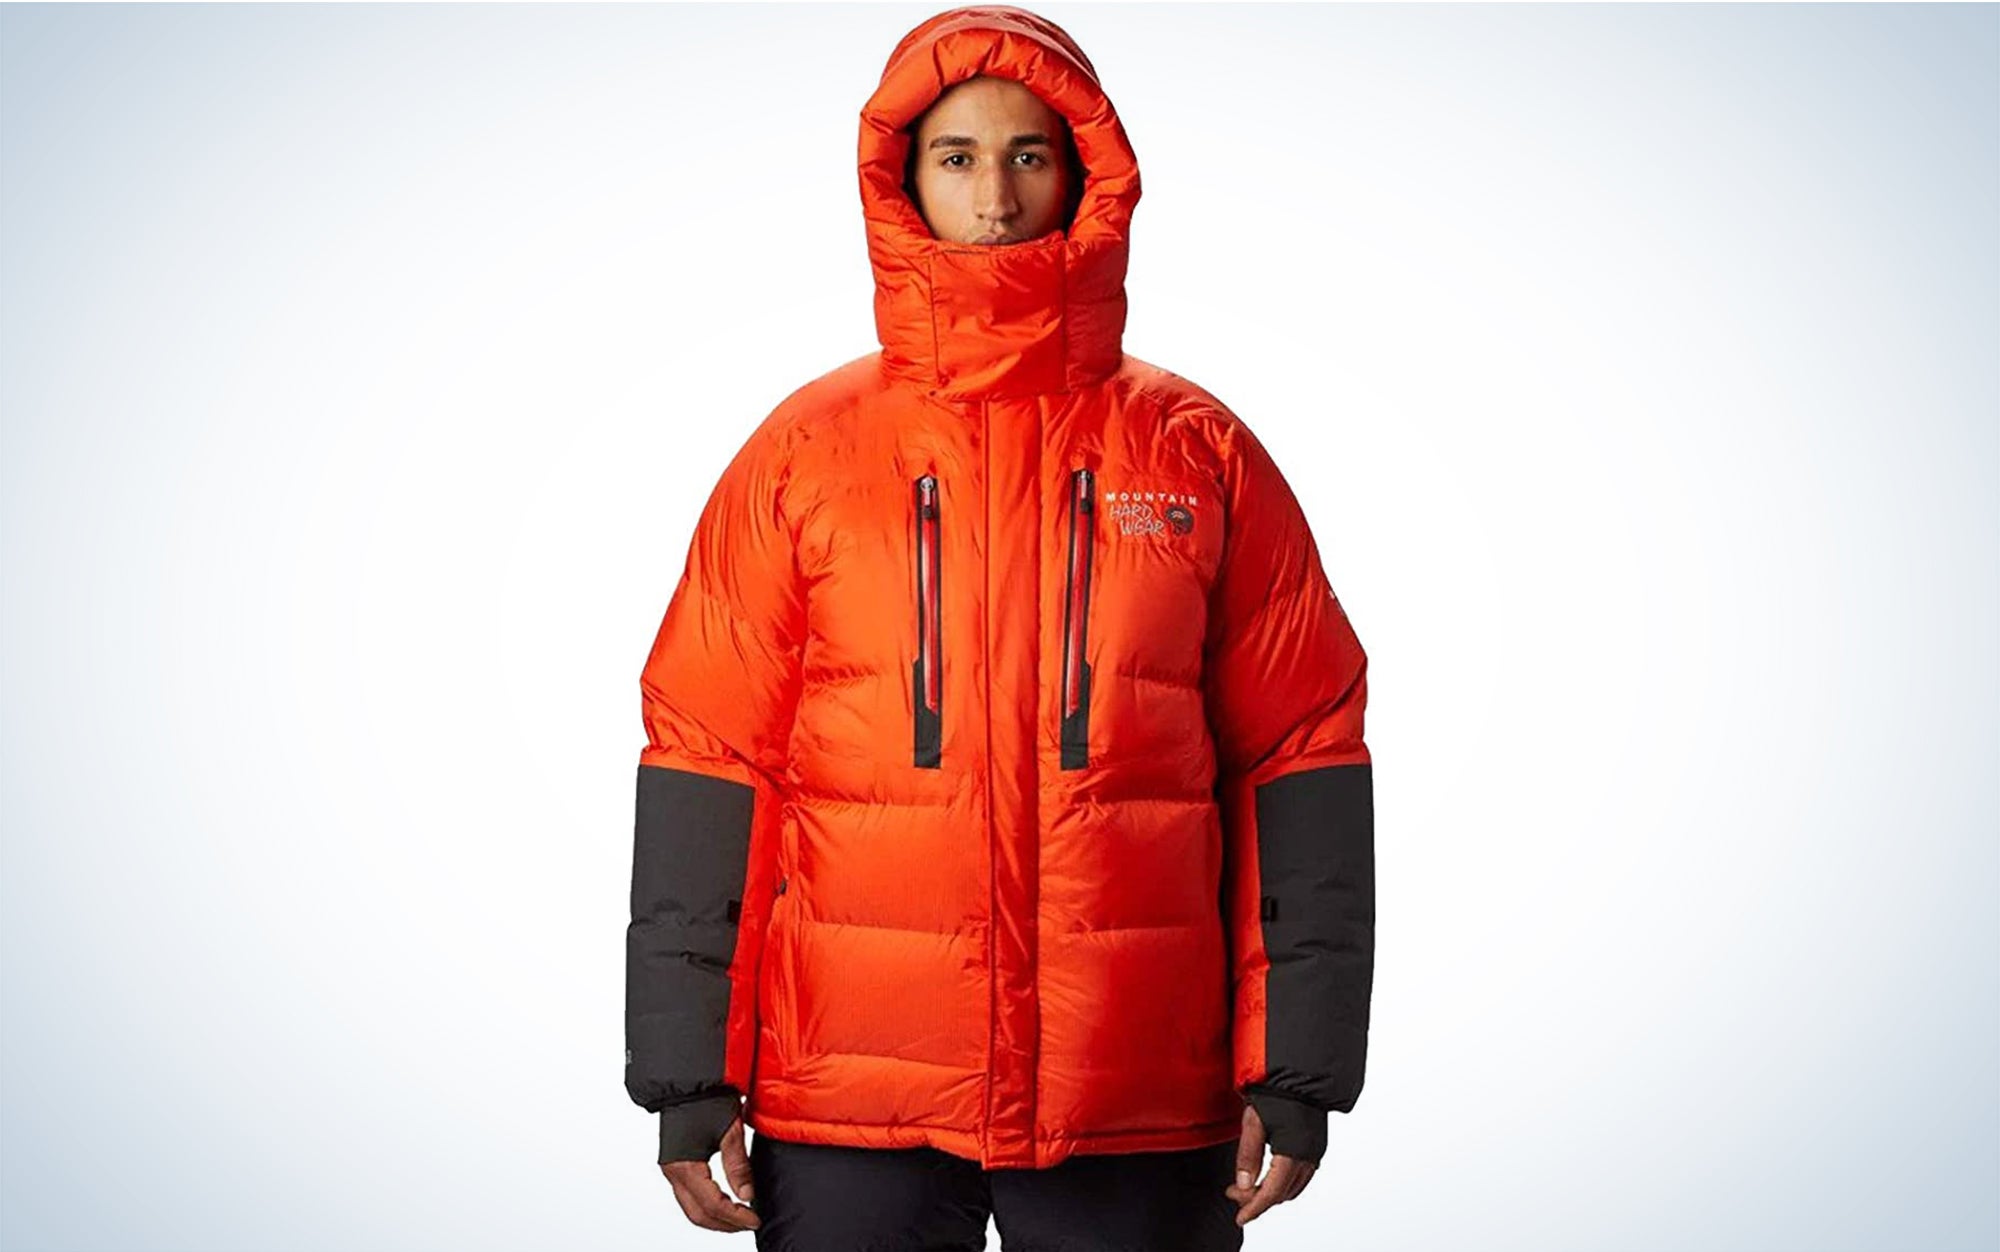 The Mountain Hardwear Men's Absolute Zero Parka is the best parka for extreme cold temperatures.